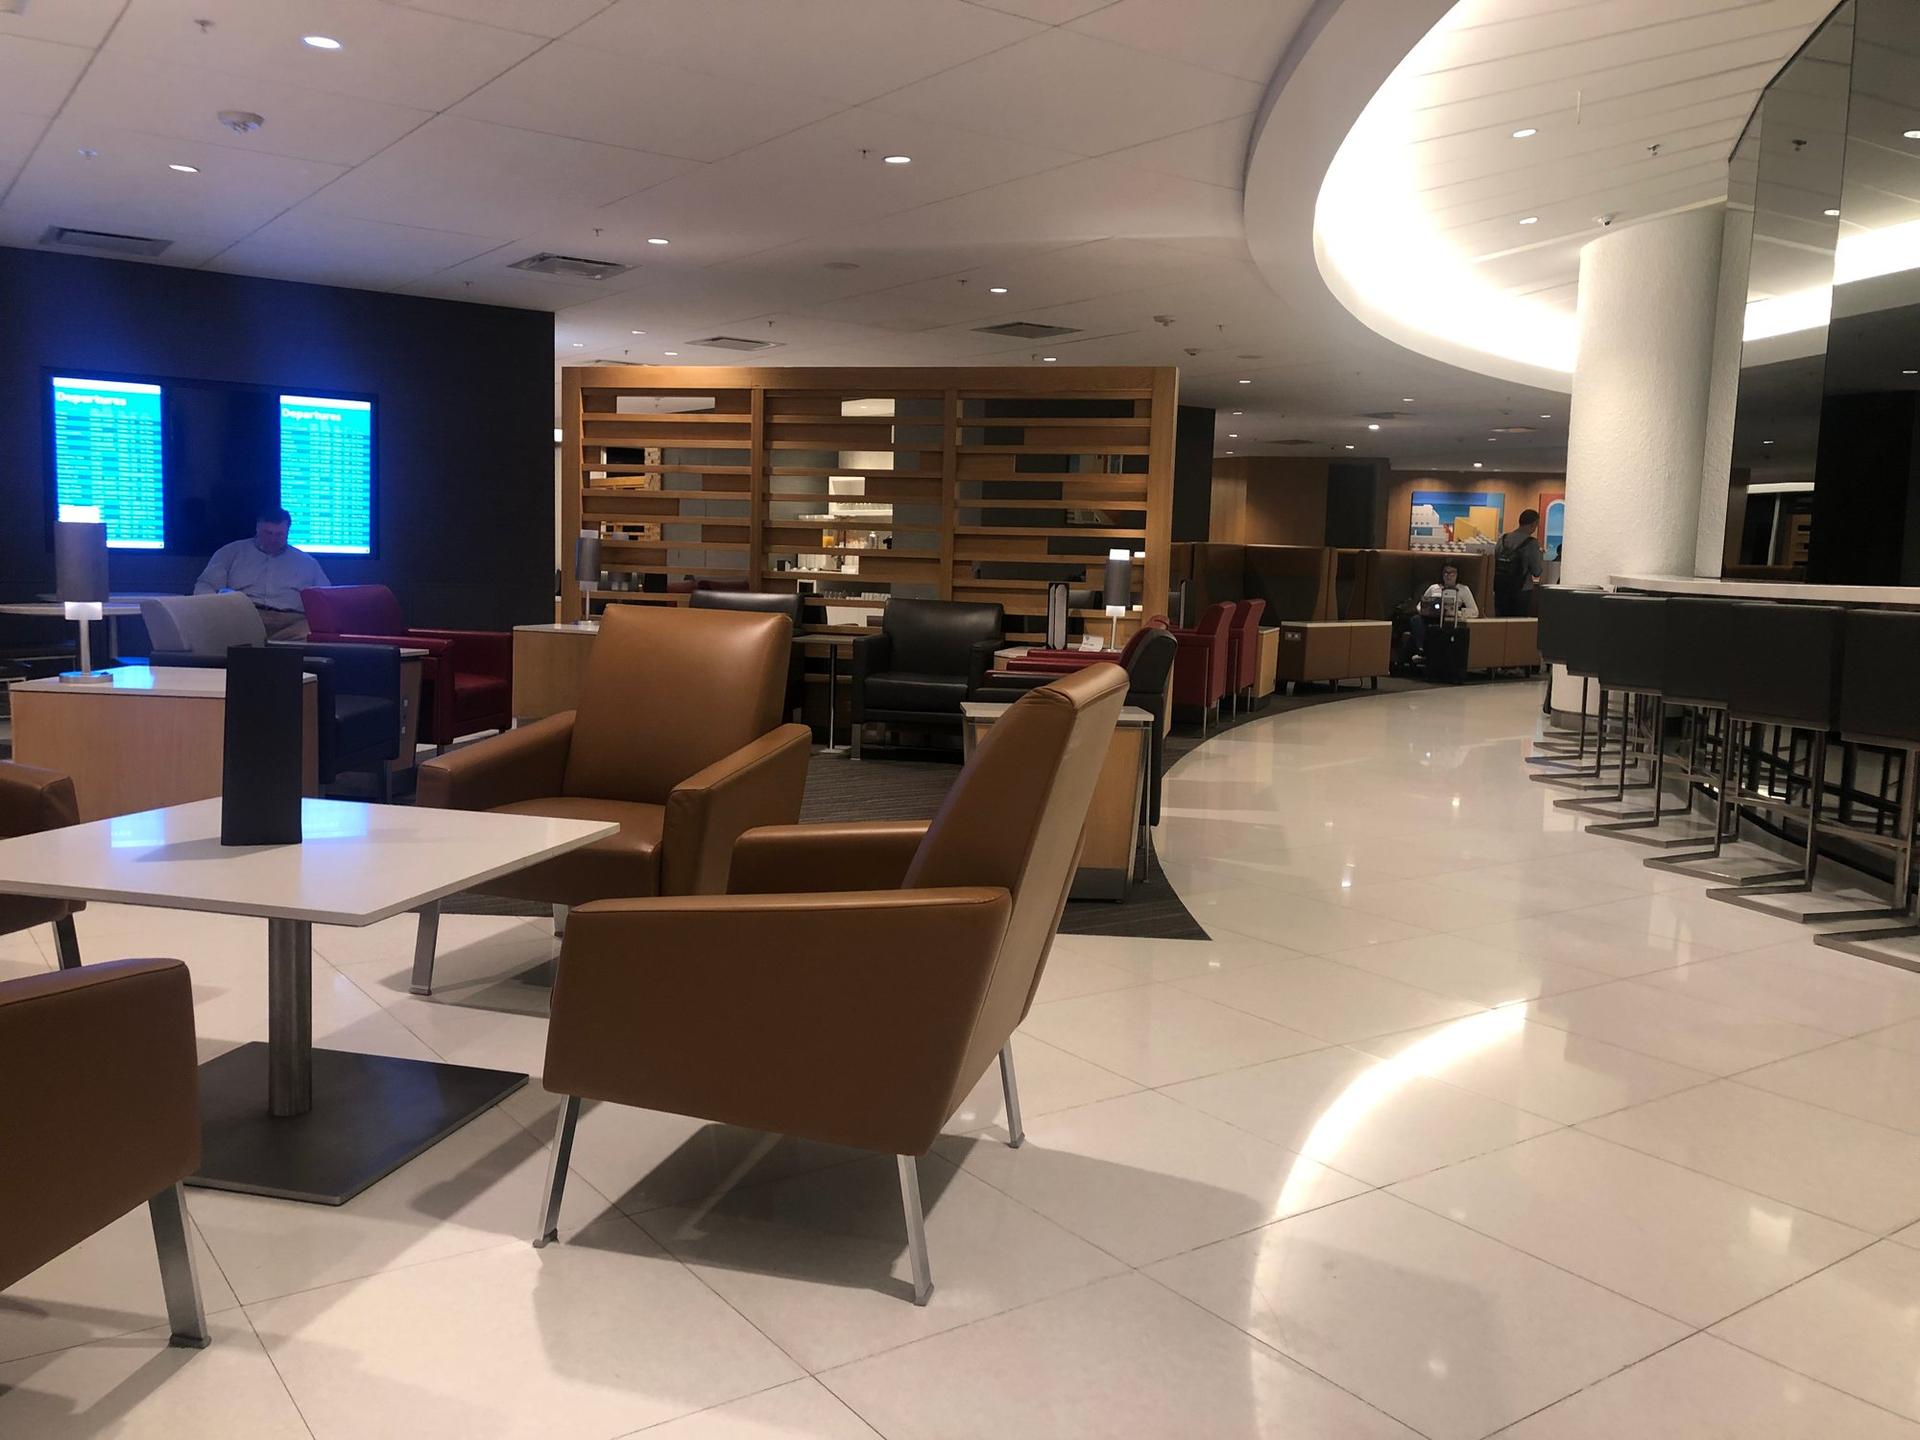 American Airlines Admirals Club (Gate D15) image 23 of 25